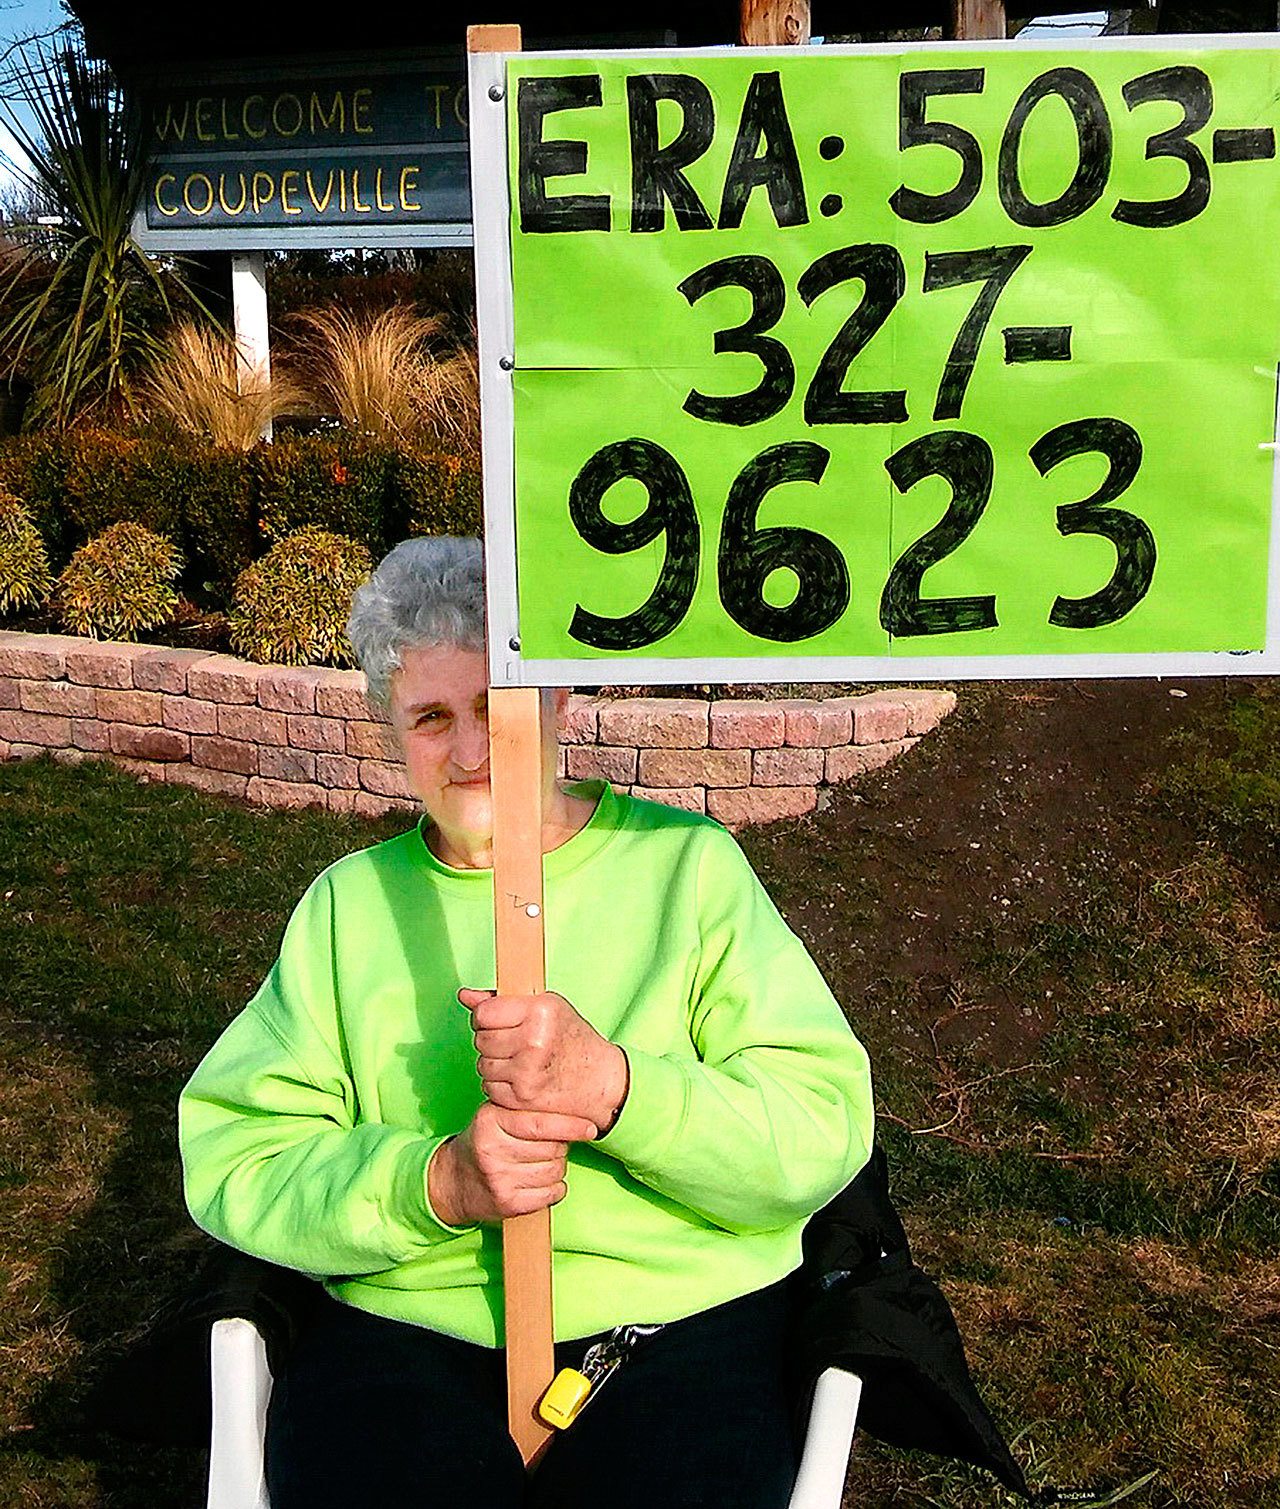 Mary Whitmore, who worked for ratification of the Equal Rights Amendment in the 1970s and ’80s, holds a sign to demonstrate her support of a new push for the ERA last weekend in Coupeville. The amendment fell short of ratification, by three states, before a 1982 deadline. Whitmore is heading a new Island County Democrats ERA committee. (Courtesy Mary Whitmore)